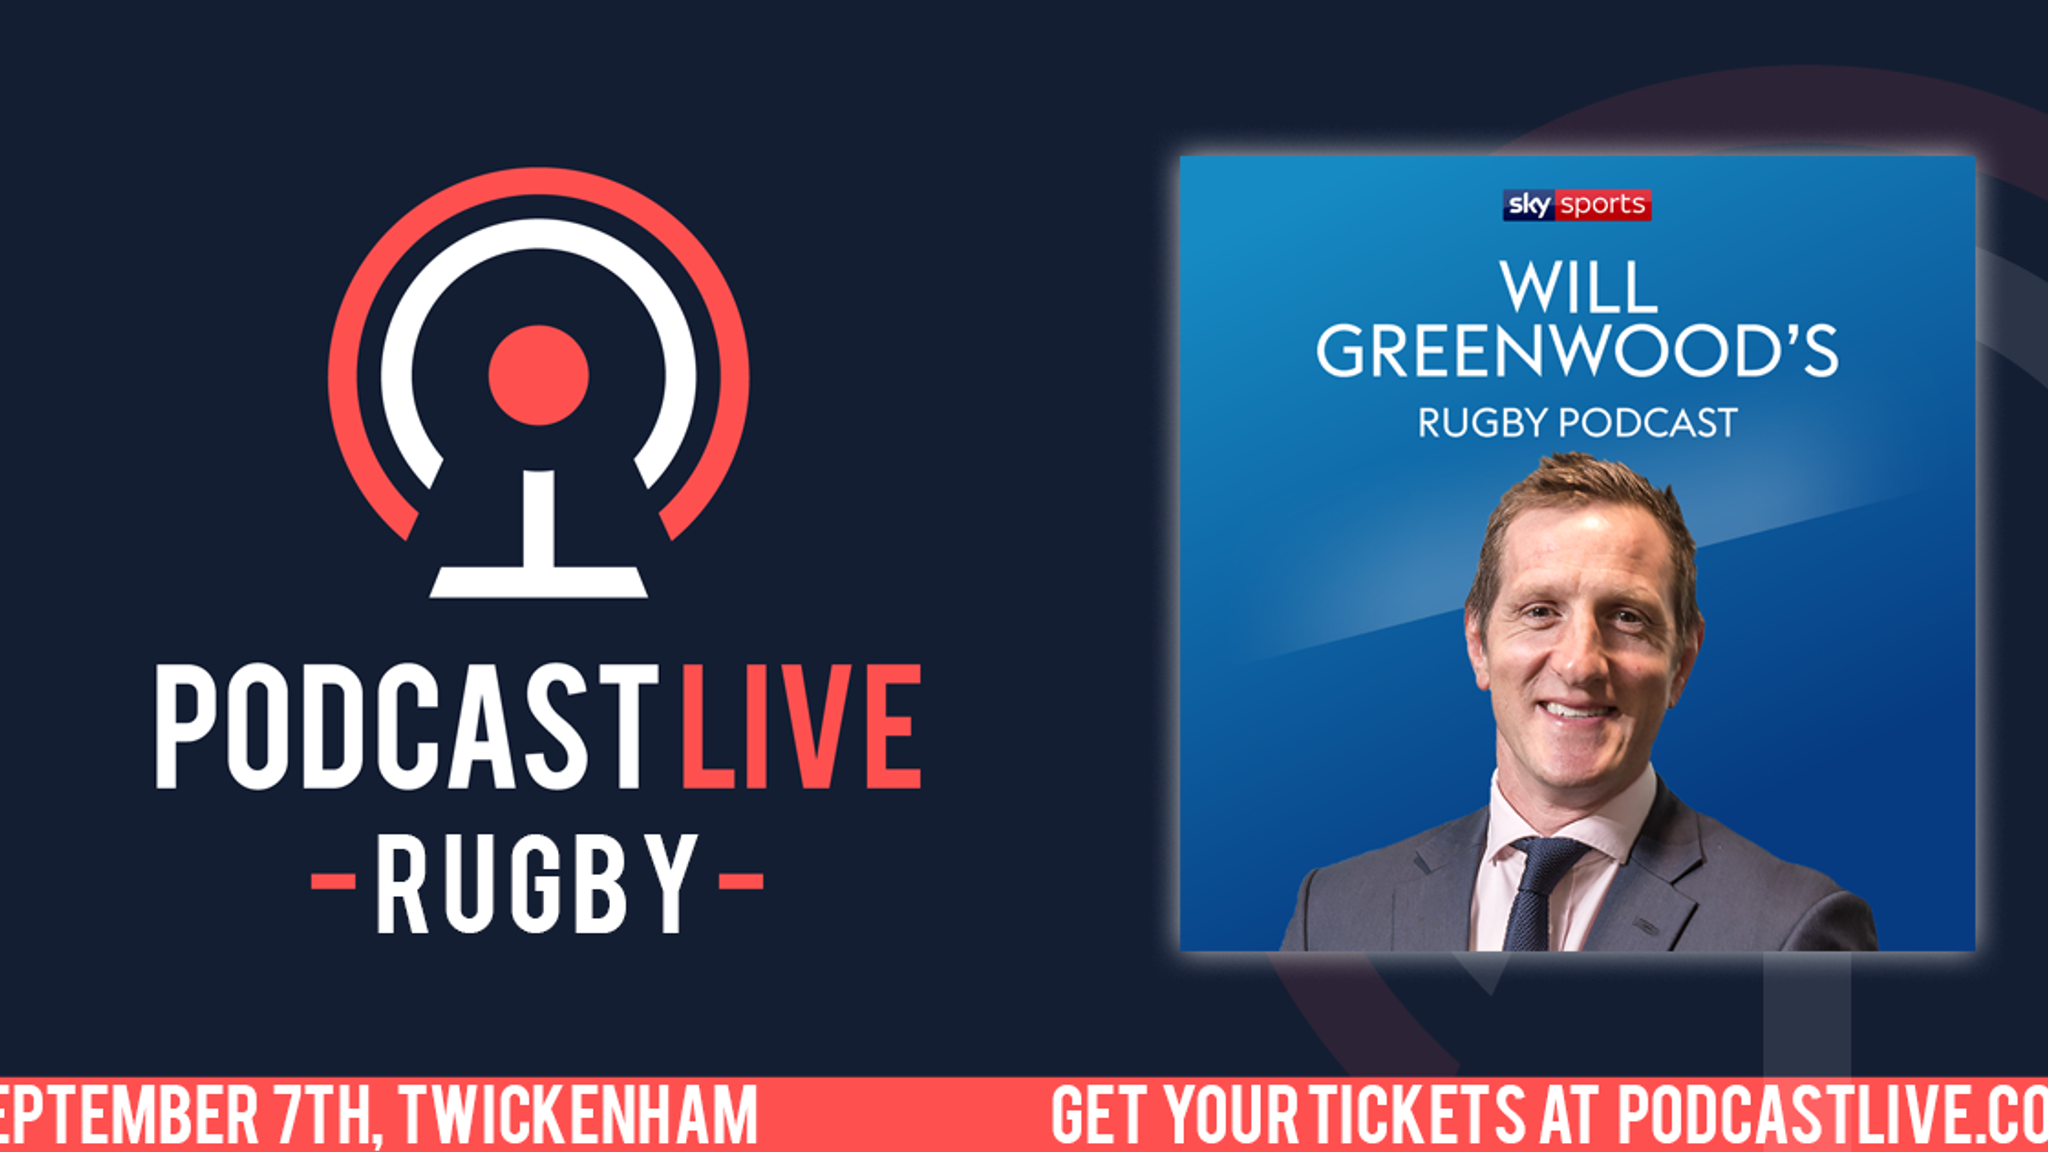 Will Greenwood Podcast confirmed for Podcast Live Rugby at Twickenham Rugby Union News Sky Sports